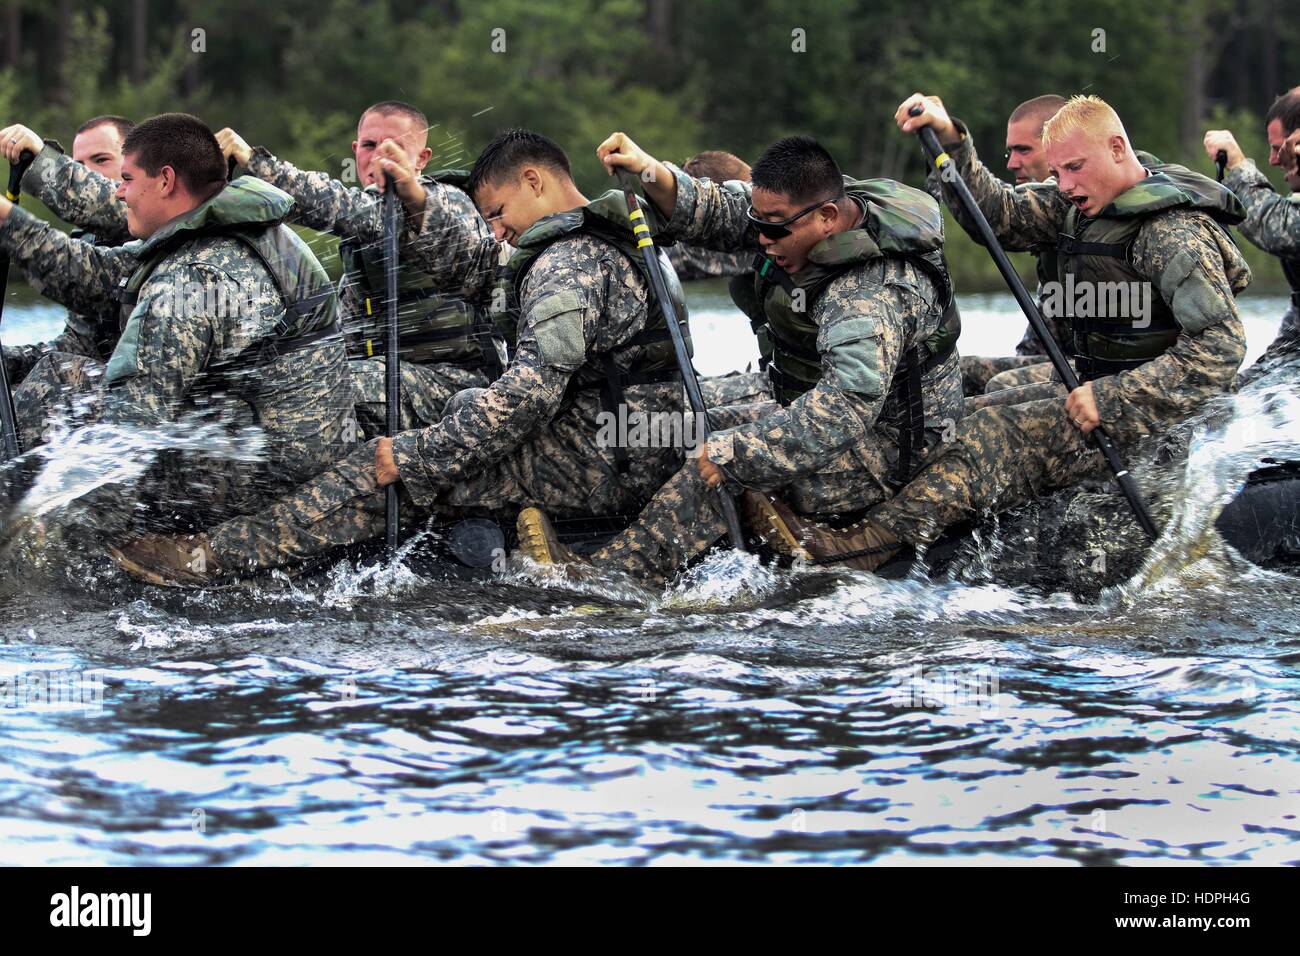 U.S. paratrooper soldiers paddle an inflatable Zodiac boat across Mott Lake during water teamwork training at Fort Bragg July 30, 2015 near Silver City, North Carolina. Stock Photo